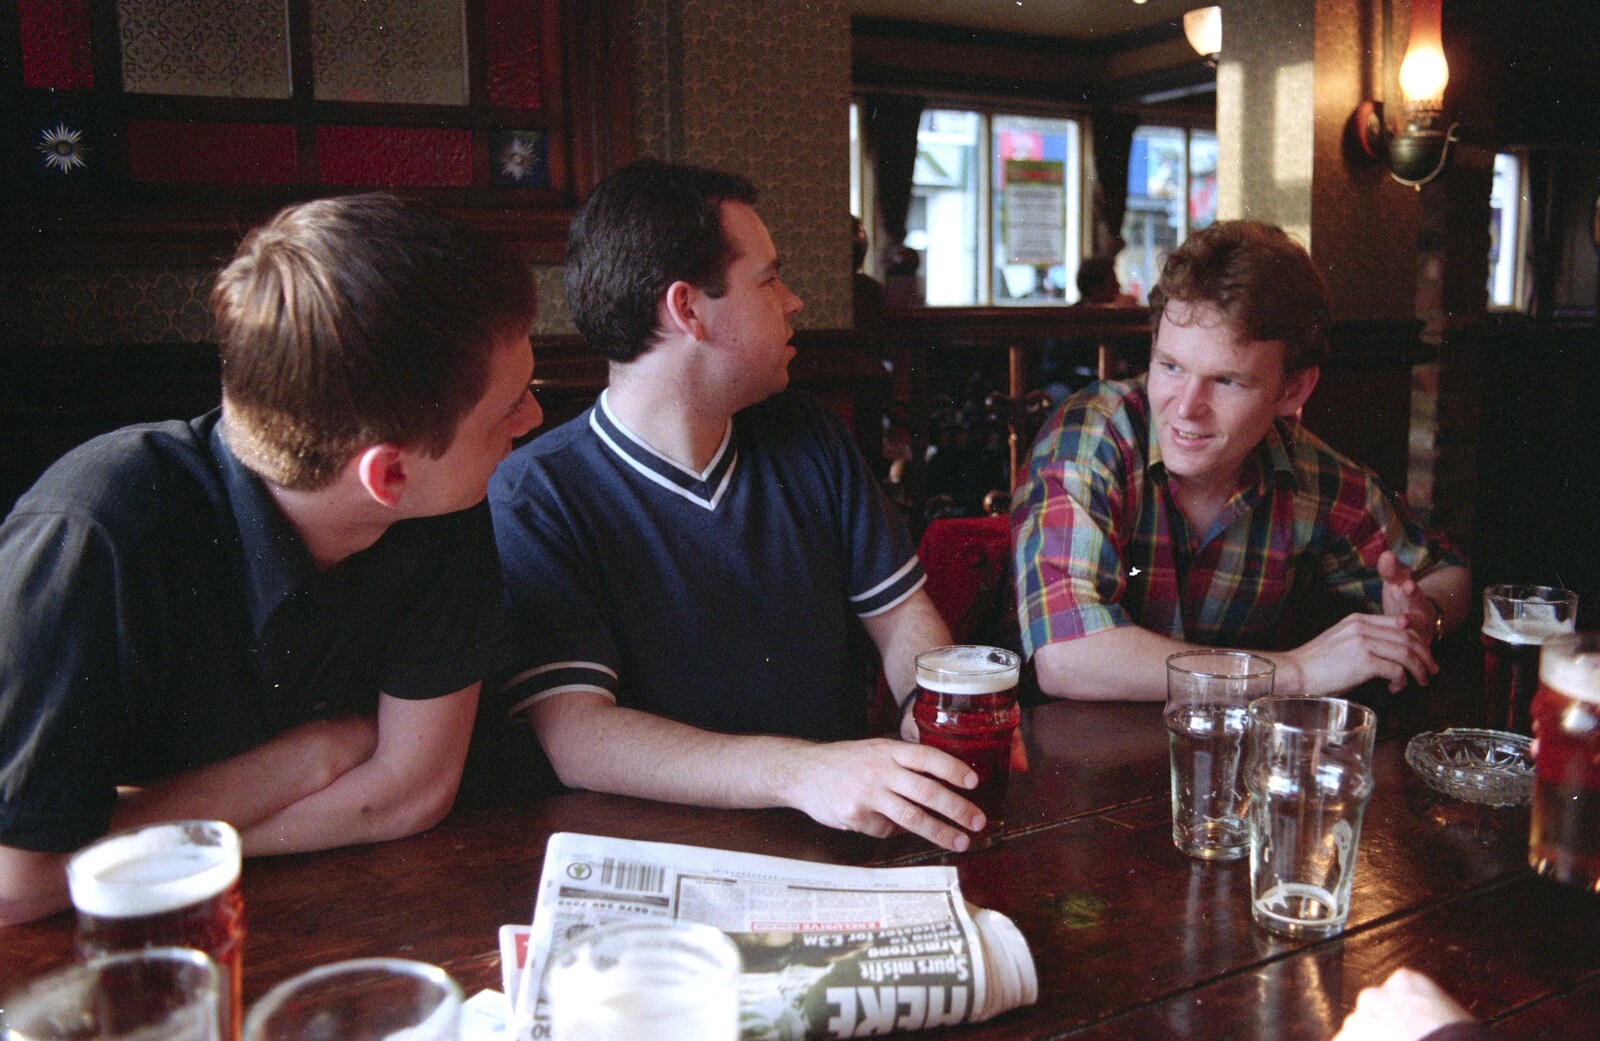 Andrew, Russell and Joe discuss stuff from CISU at the Dhaka Diner, Tacket Street, Ipswich - 25th May 2000